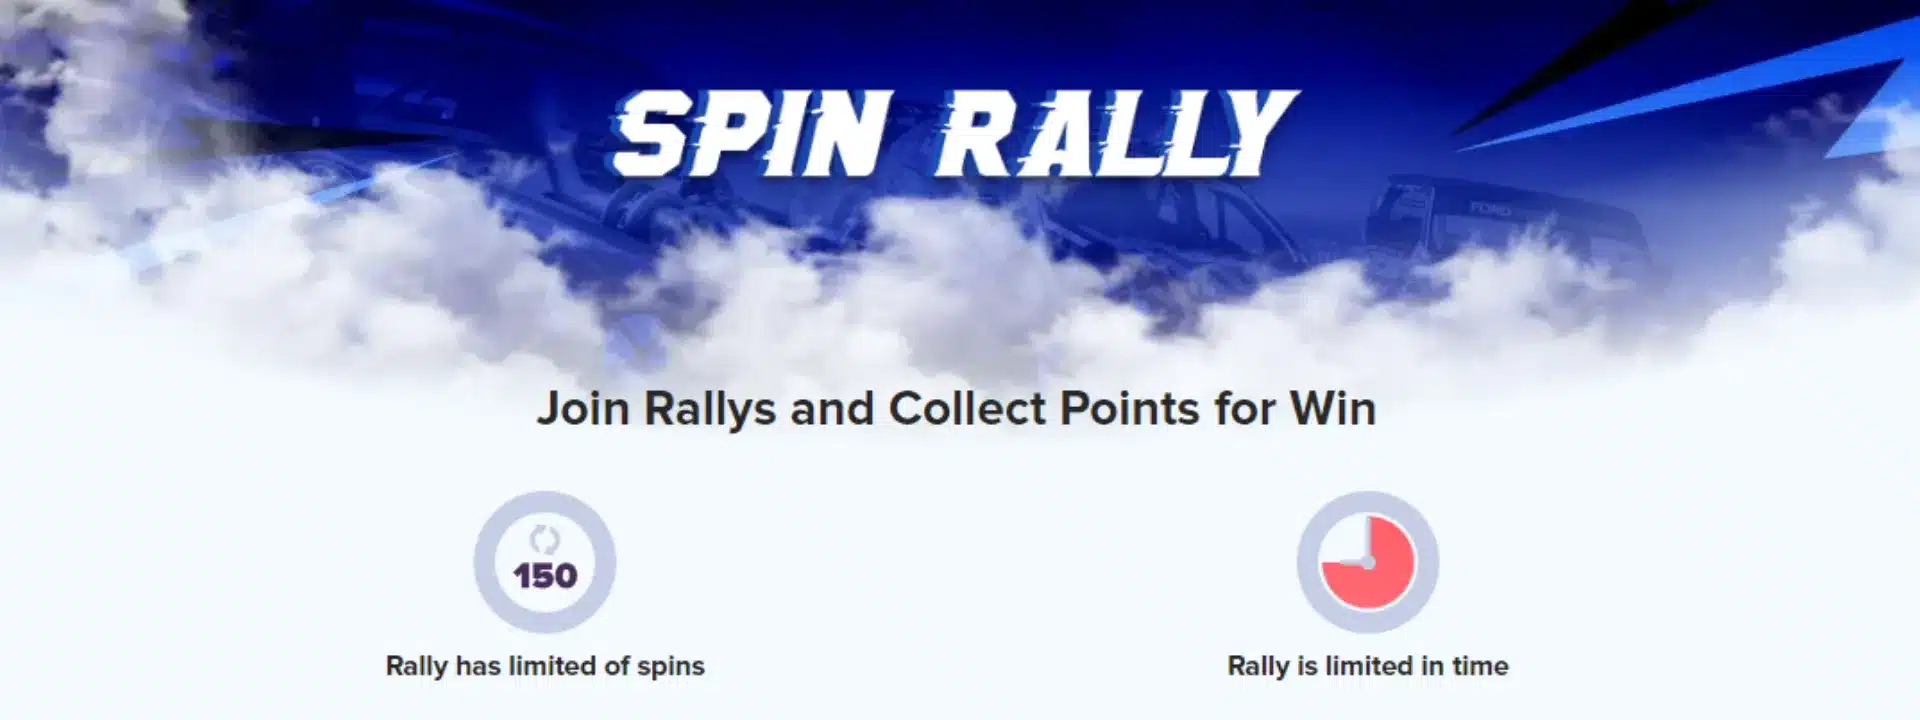 SpinRally